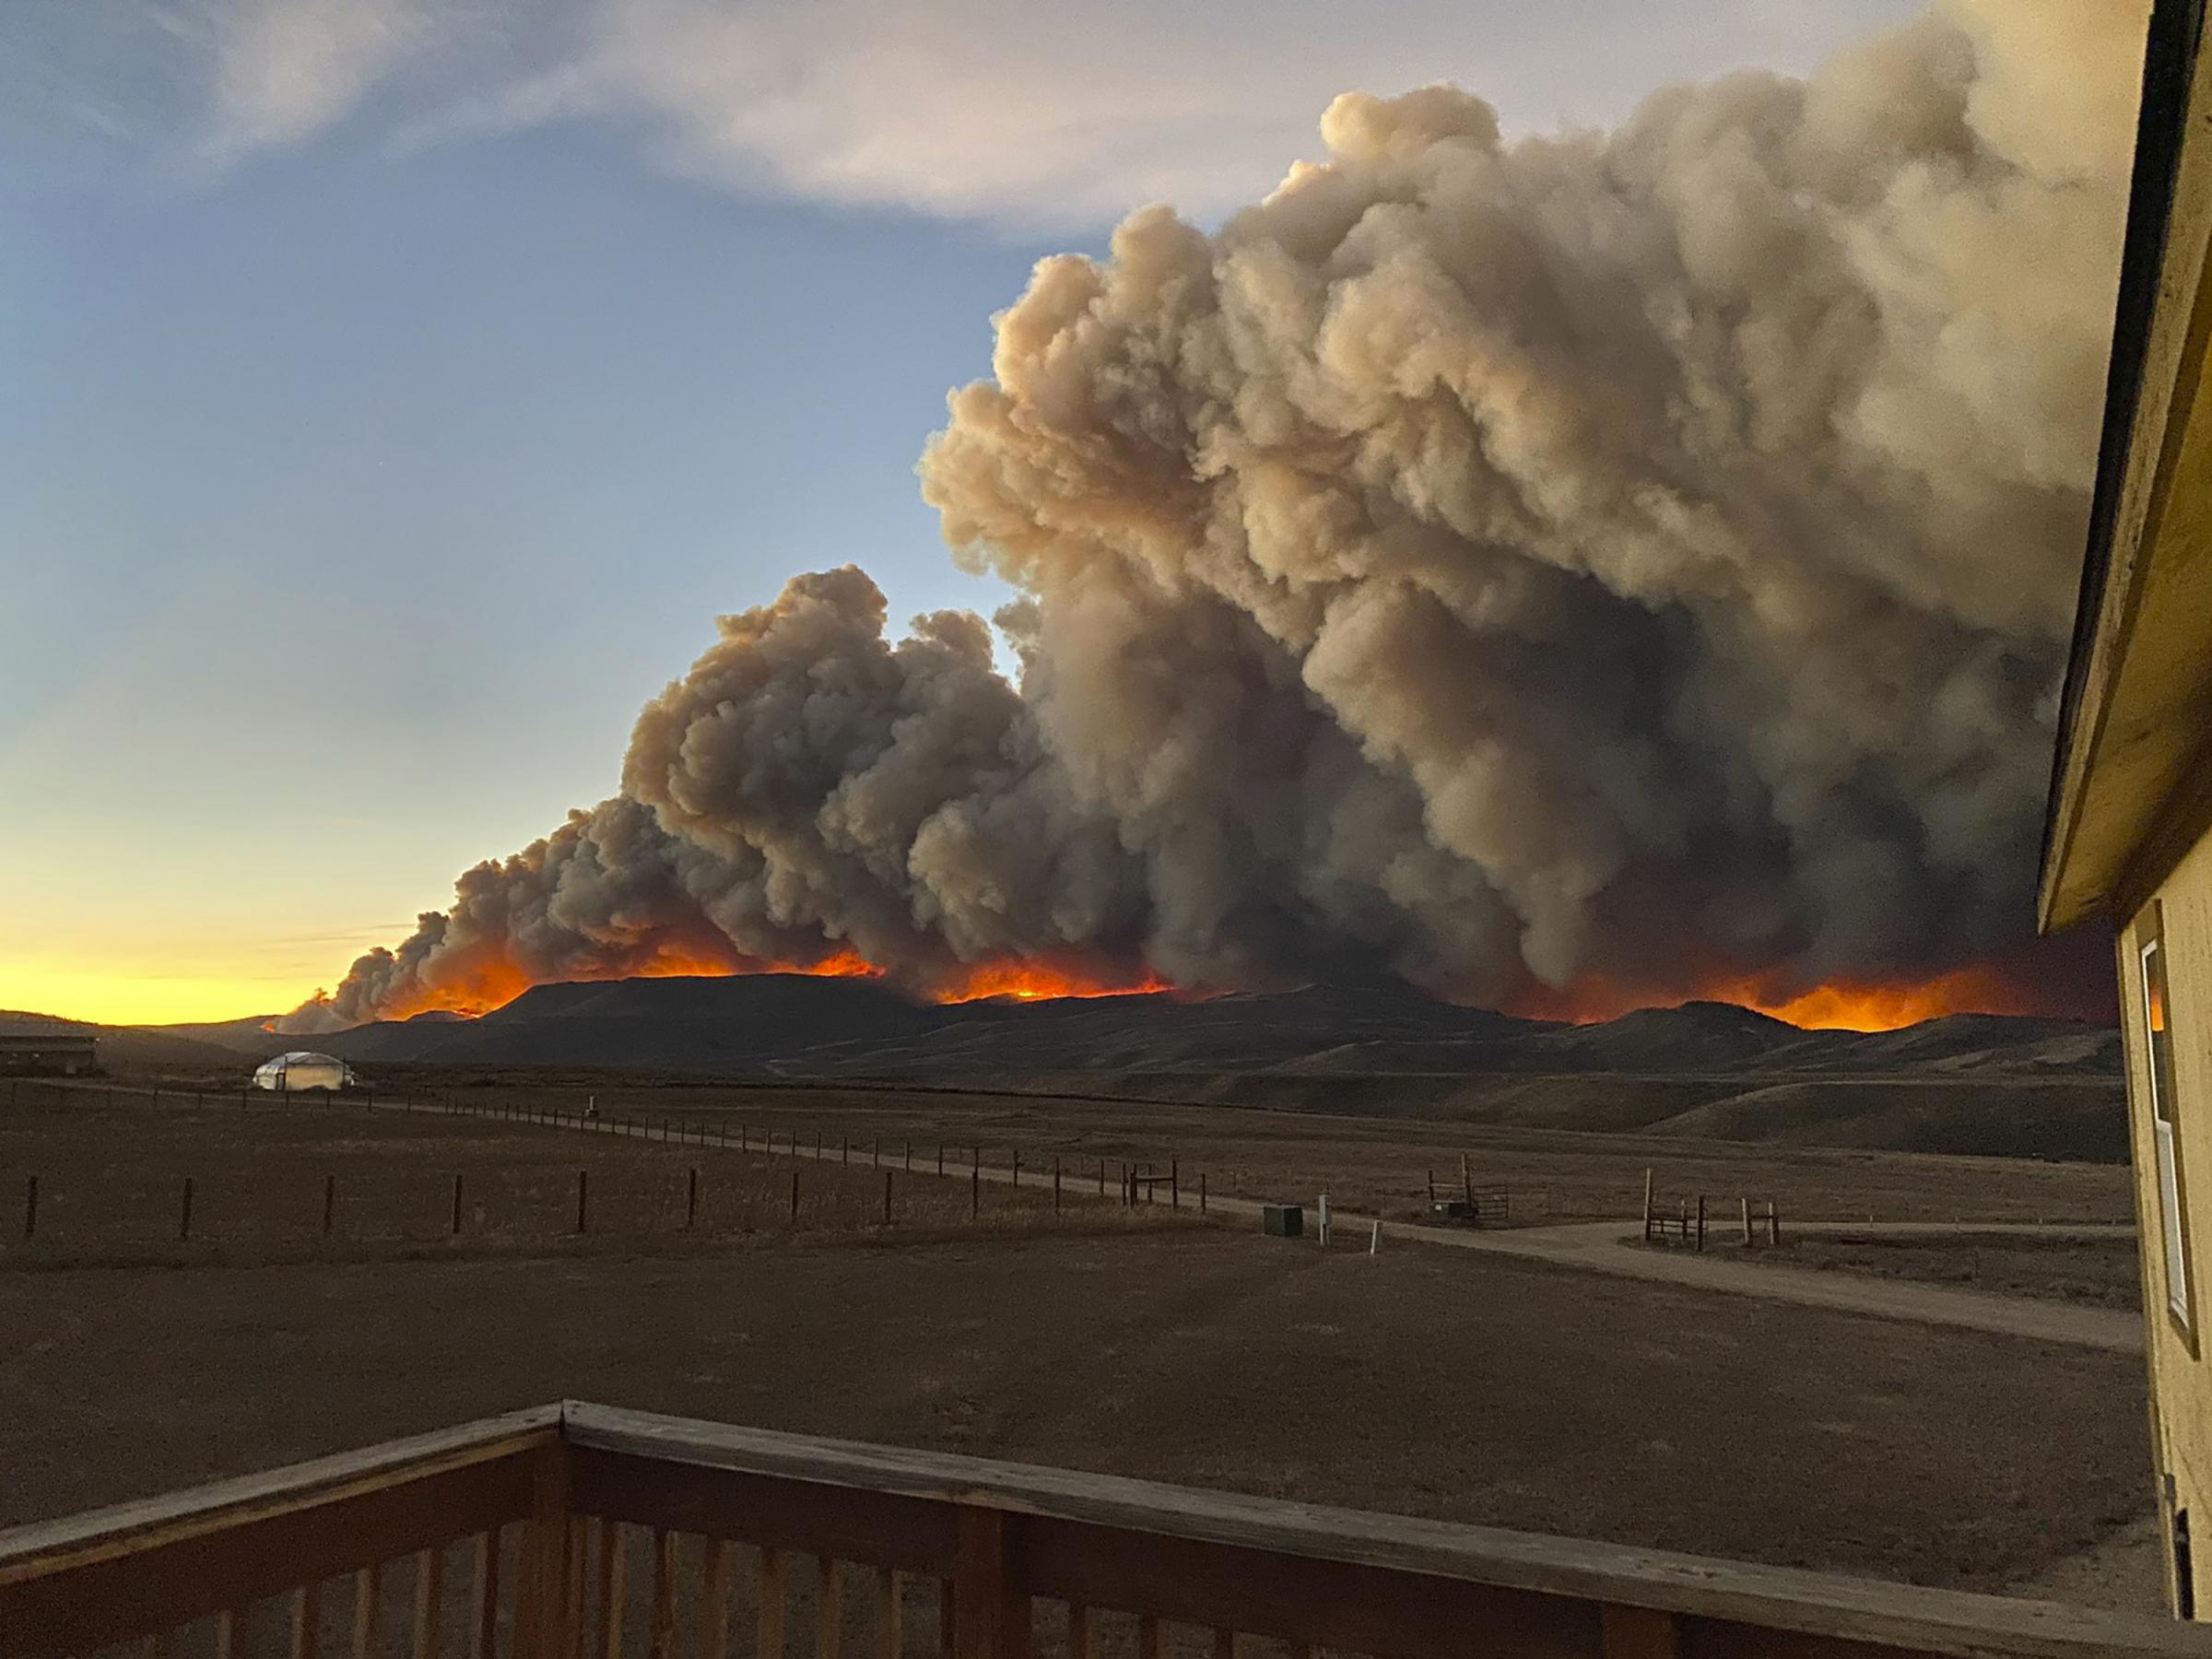 Colorado Fire Grows By Over 100,000 Acres In 1 Day, Hits Rocky Mountain